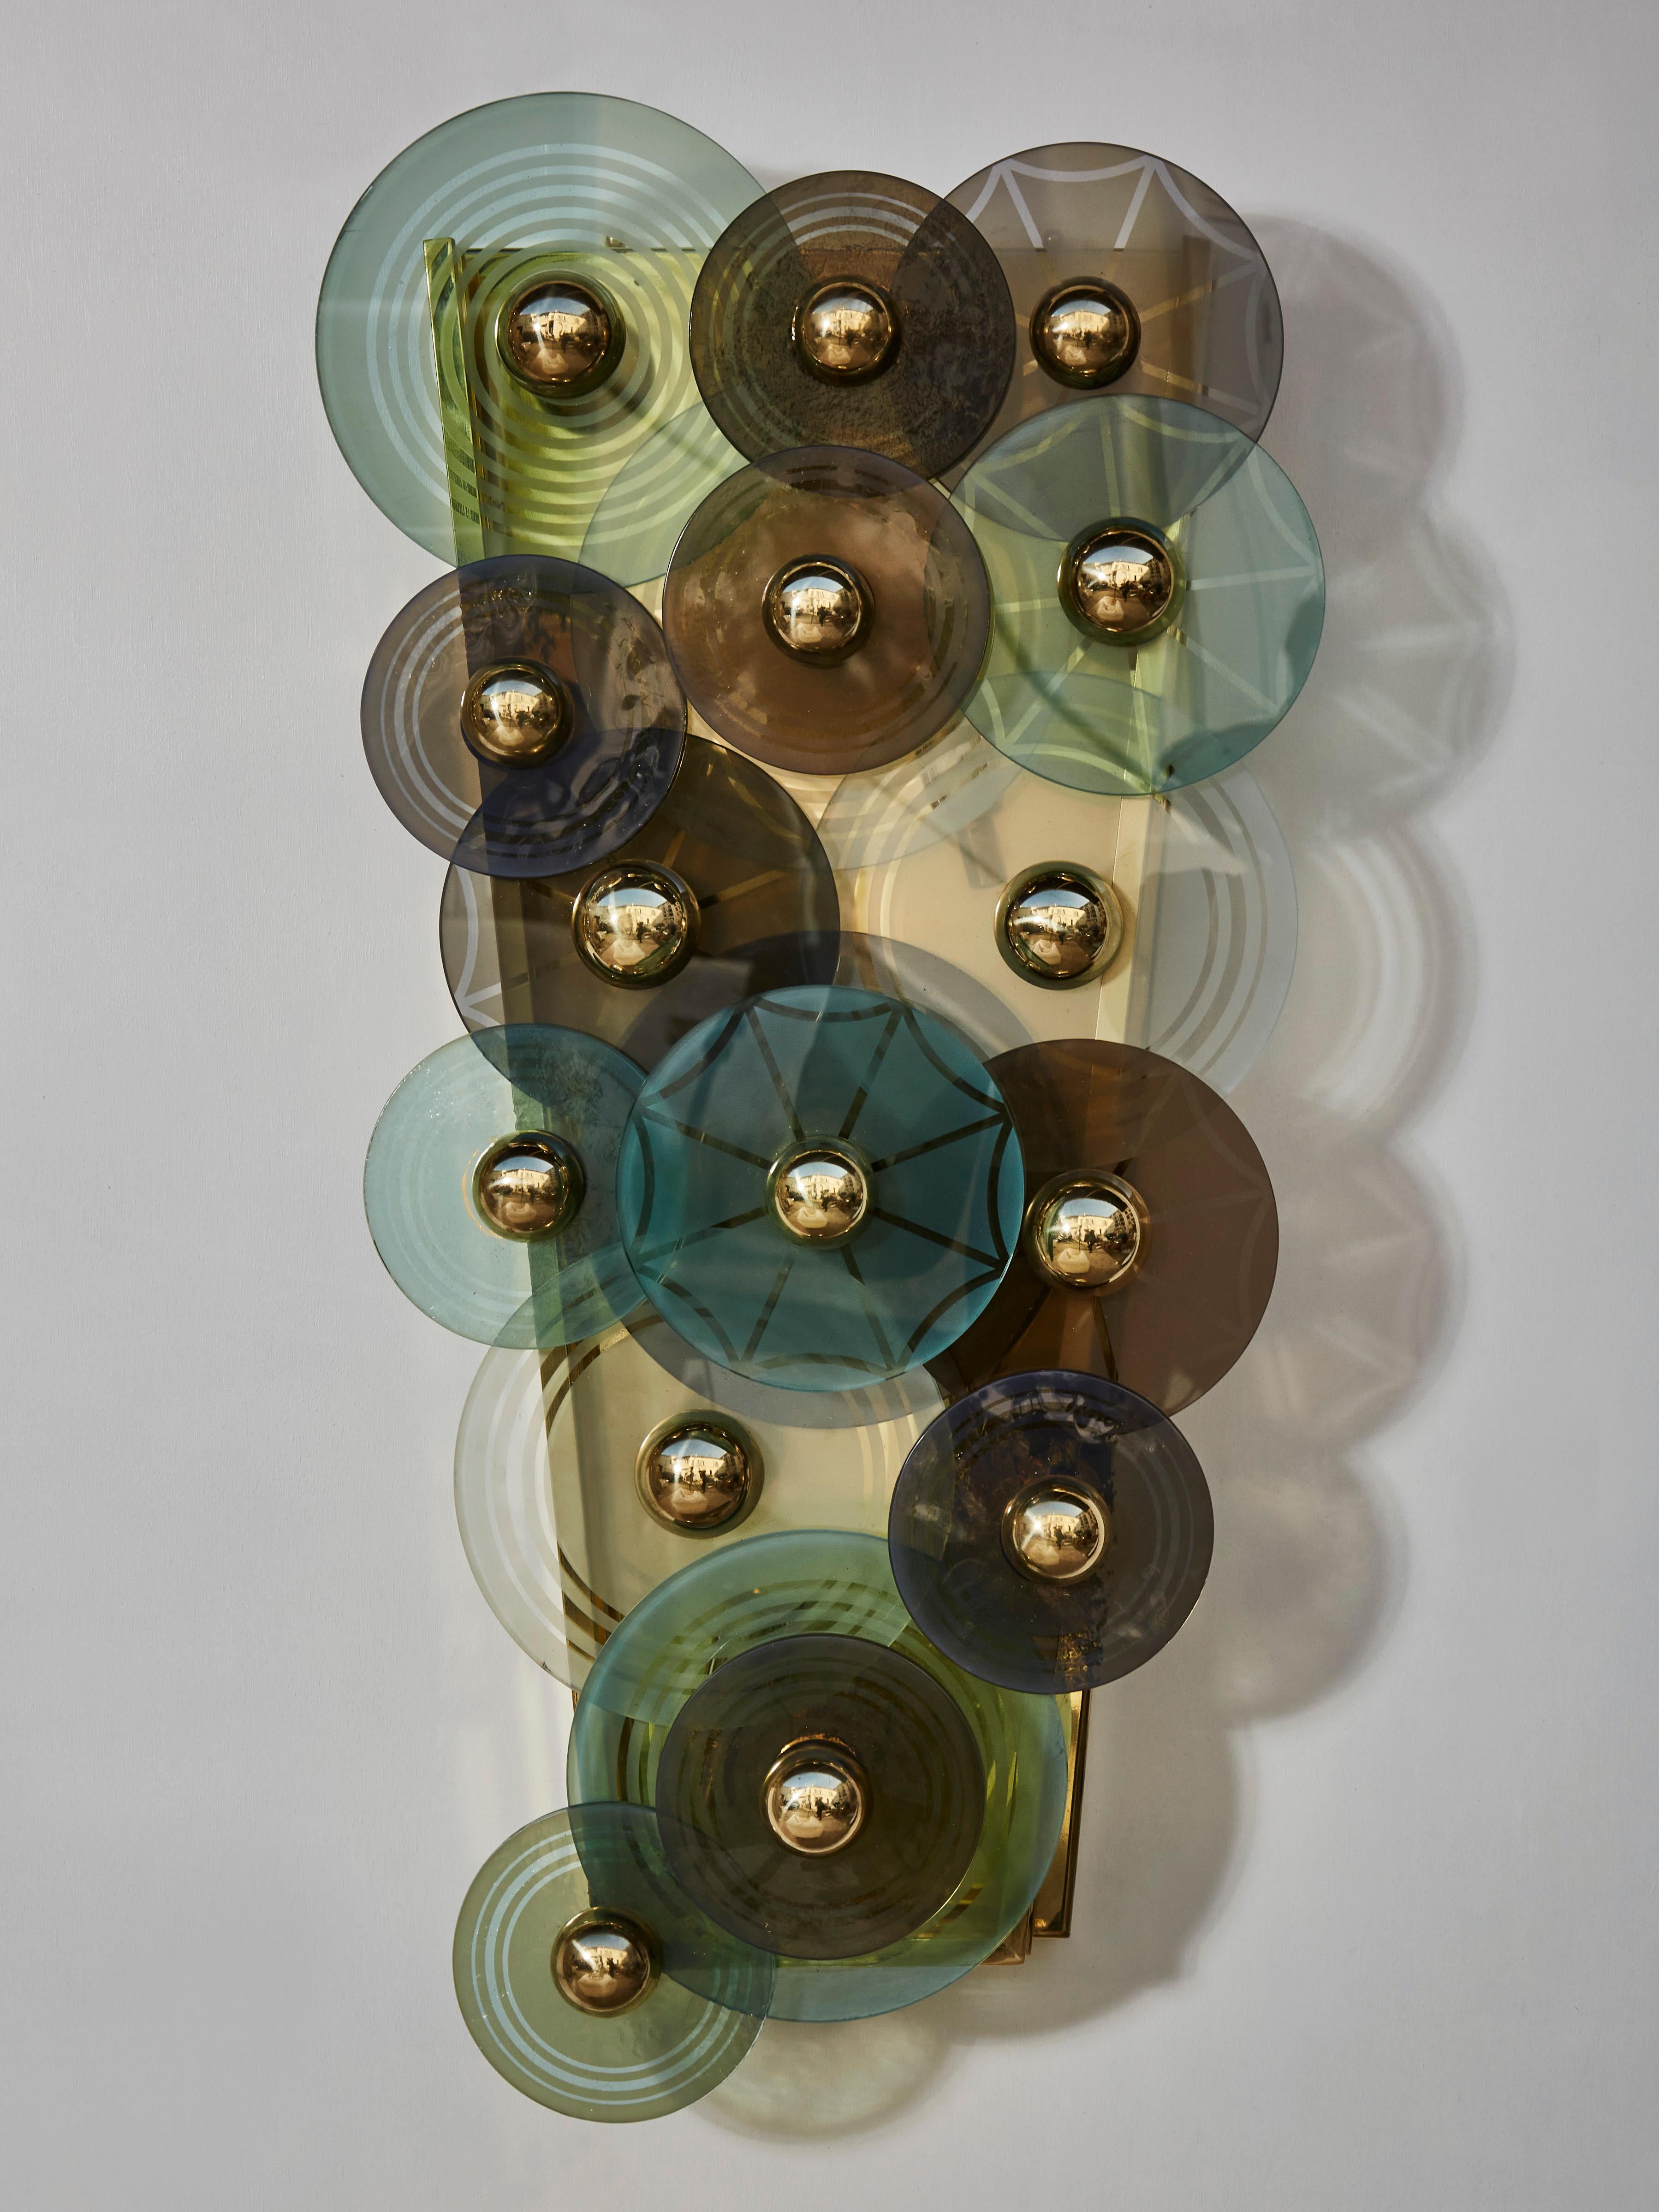 Pair of brass sconces with tainted and carved discs in murano glass.
Creation by Studio Glustin,
Italy, 2021.